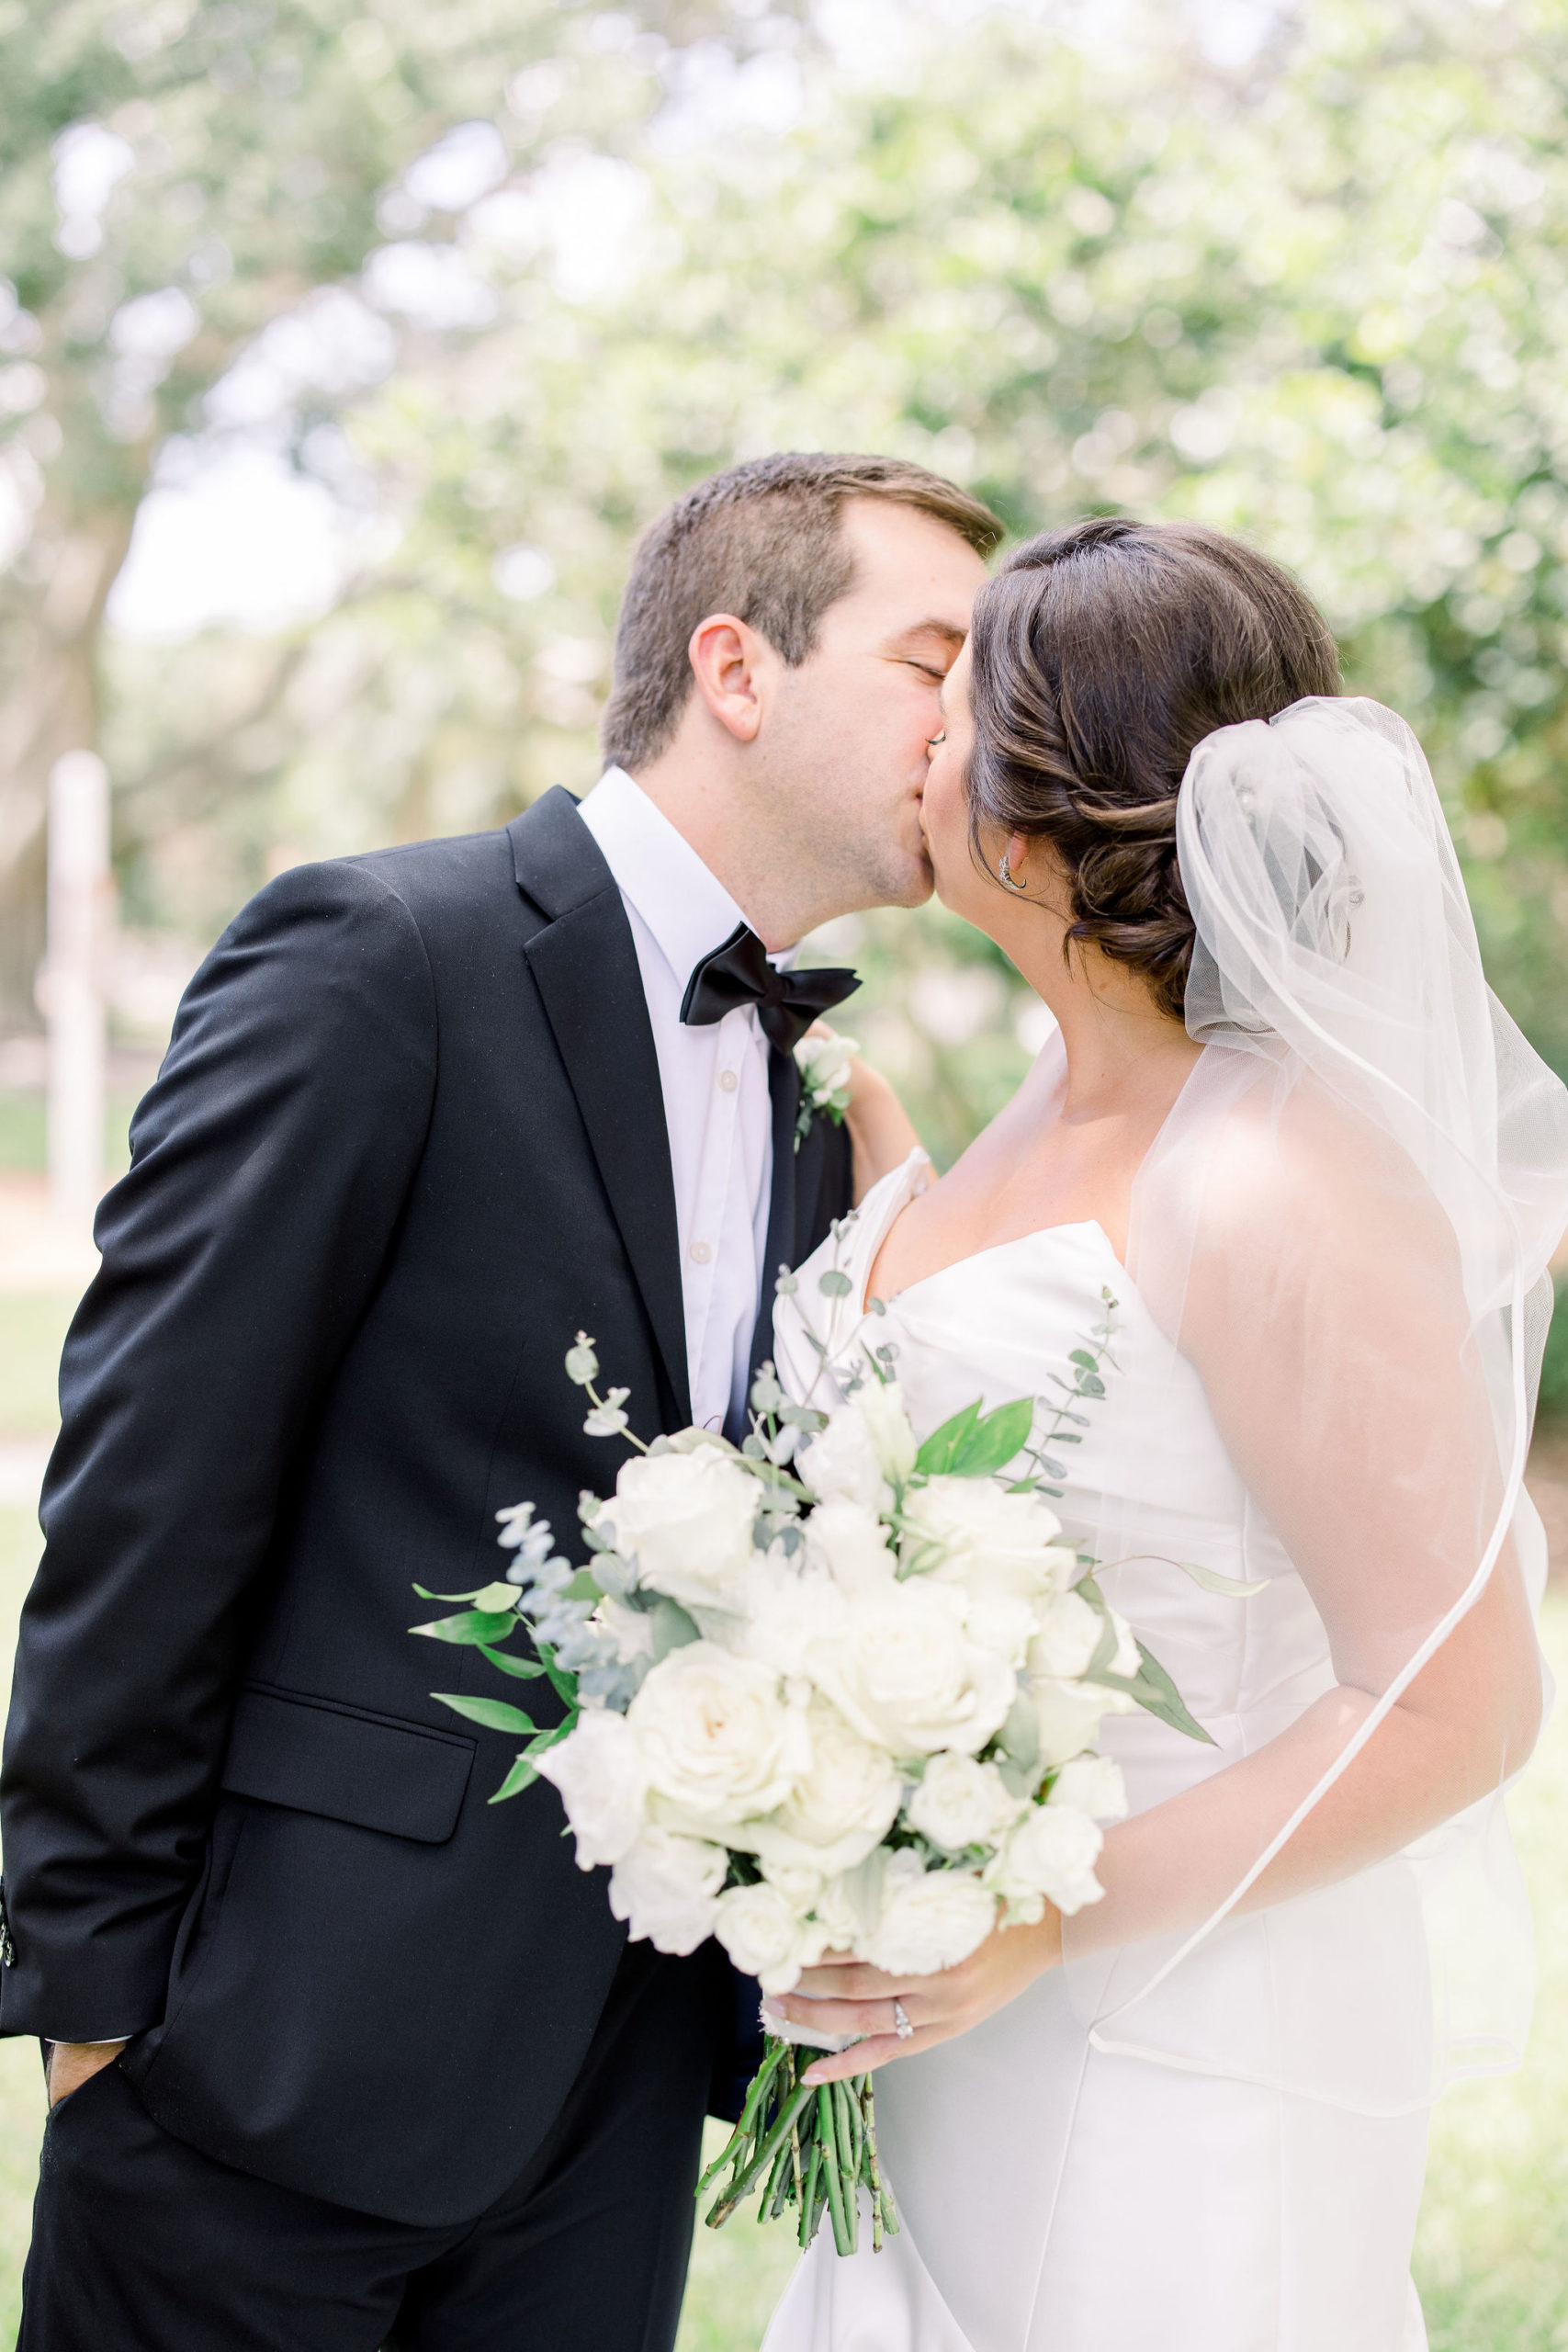 Wedding Photographer Jommy Photography captures a bride and groom kissing on their big day at a golf course. Bride with brown hair in an updo and veil kisses her new husband passionately on her wedding day.
